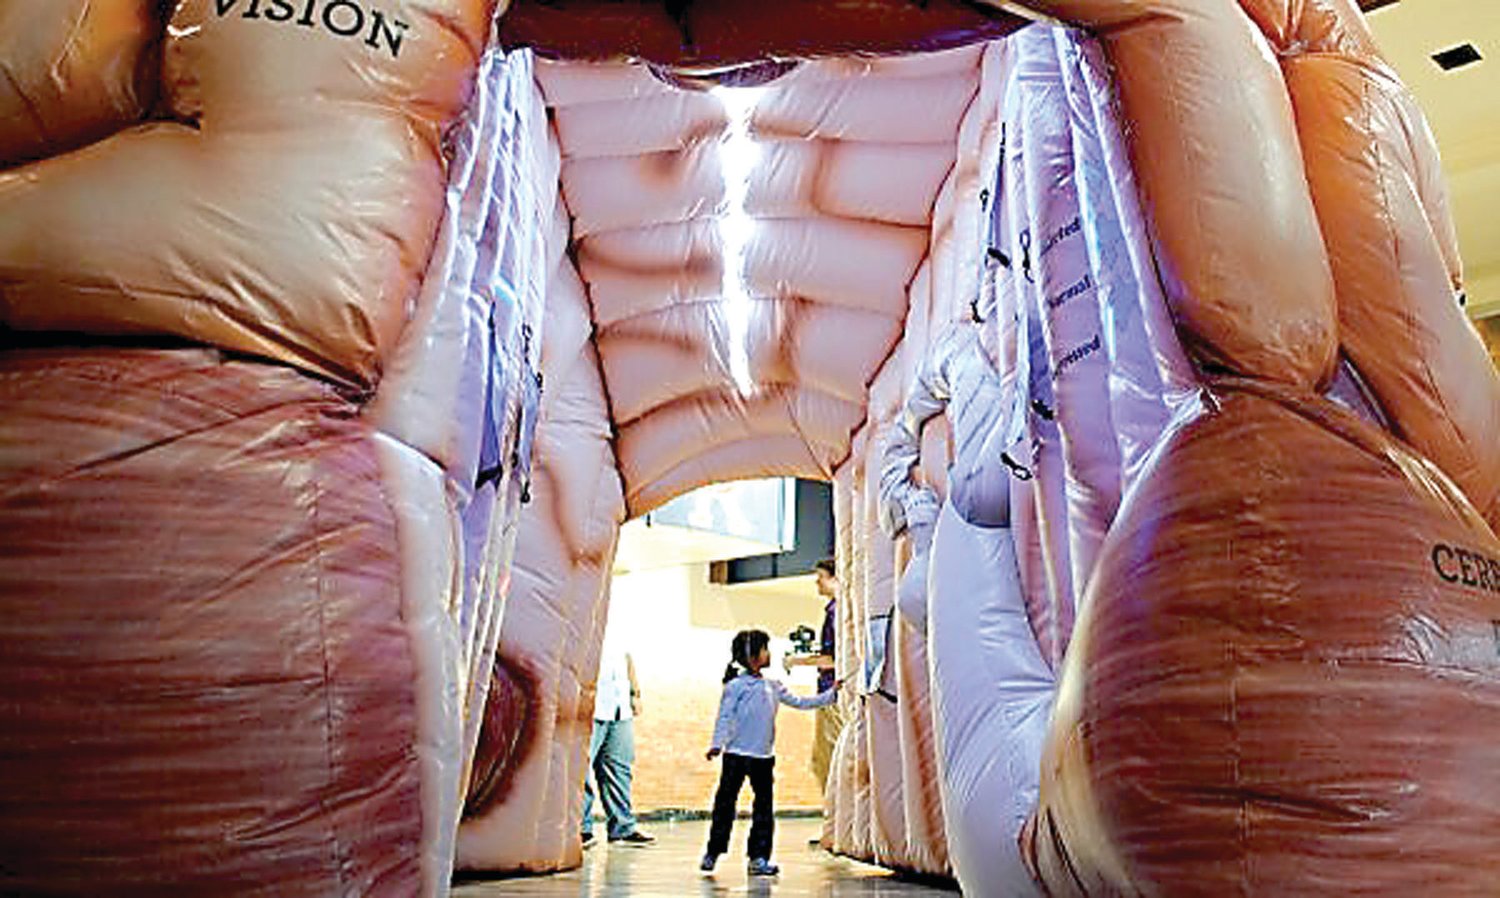 The 12-foot-high inflatable MEGA brain will be on display at the Doylestown branch of the Bucks County Free Library 10 a.m. to noon June 30. Families can walk through the brain to learn about the human brain.